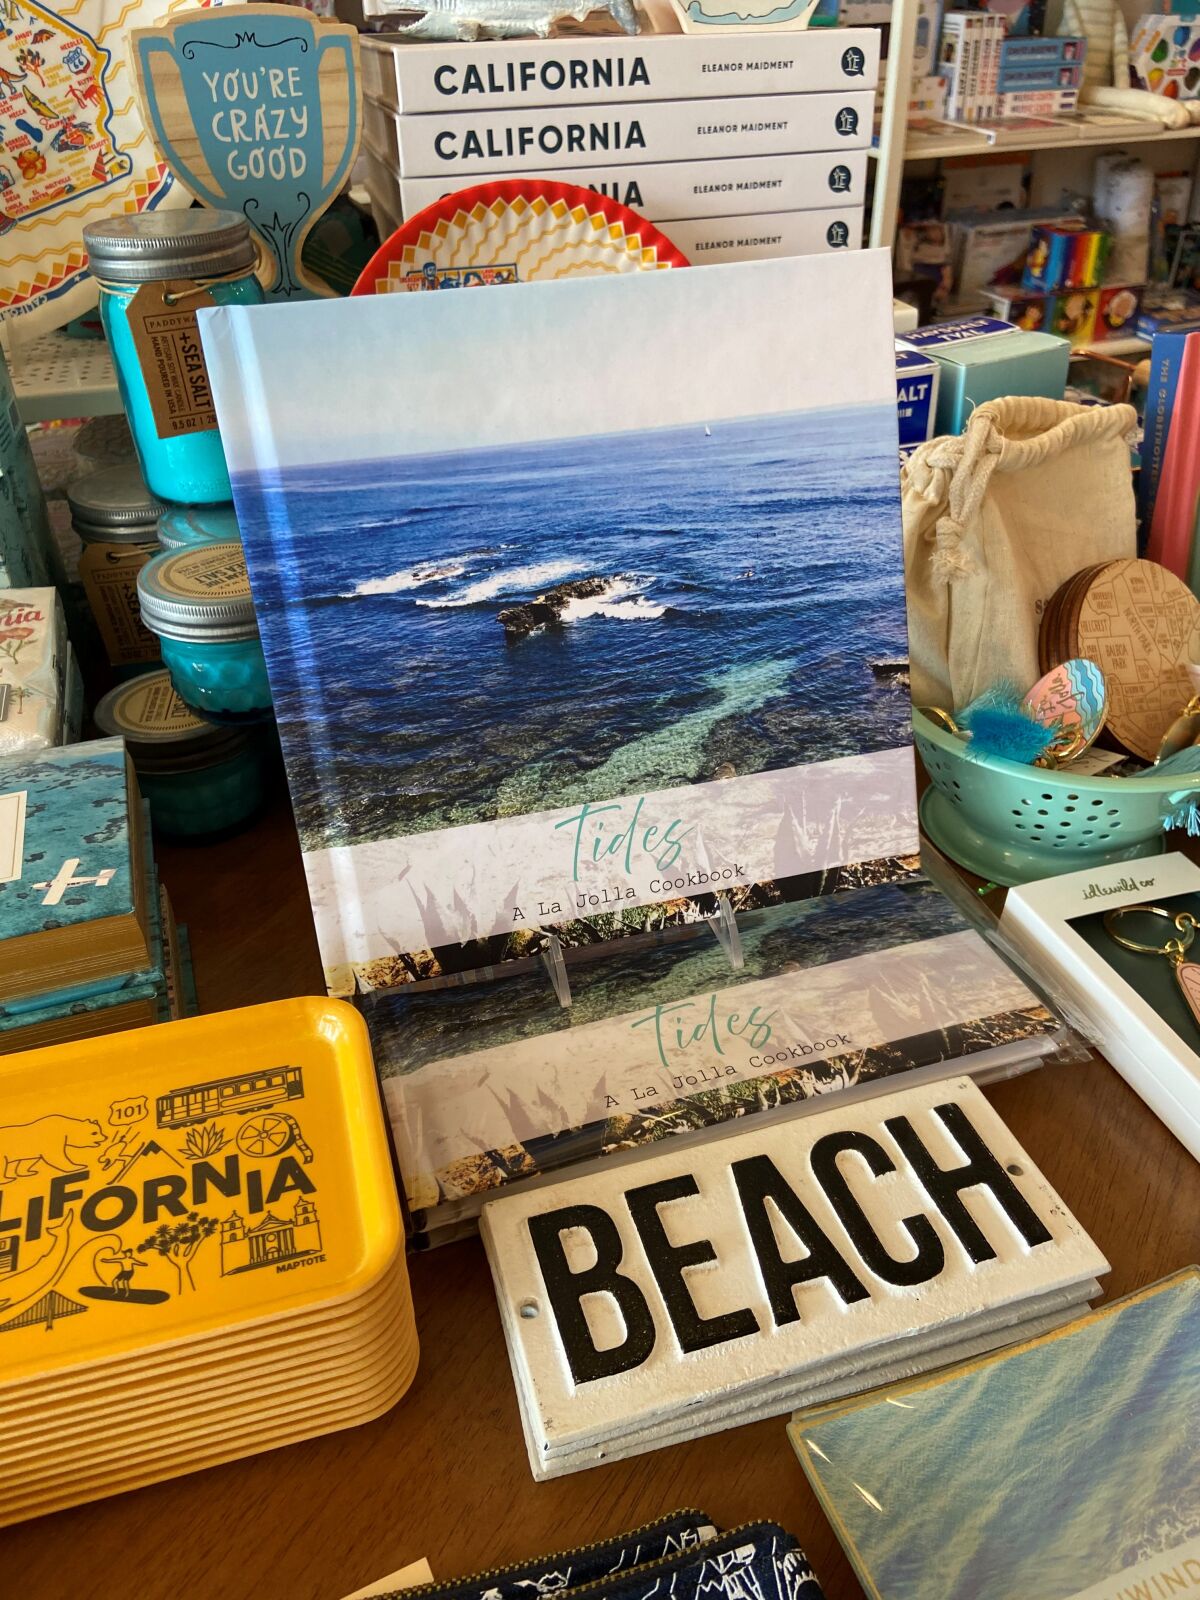 "Tides: A La Jolla Cookbook" is sold at Hi Sweetheart boutique in The Village.